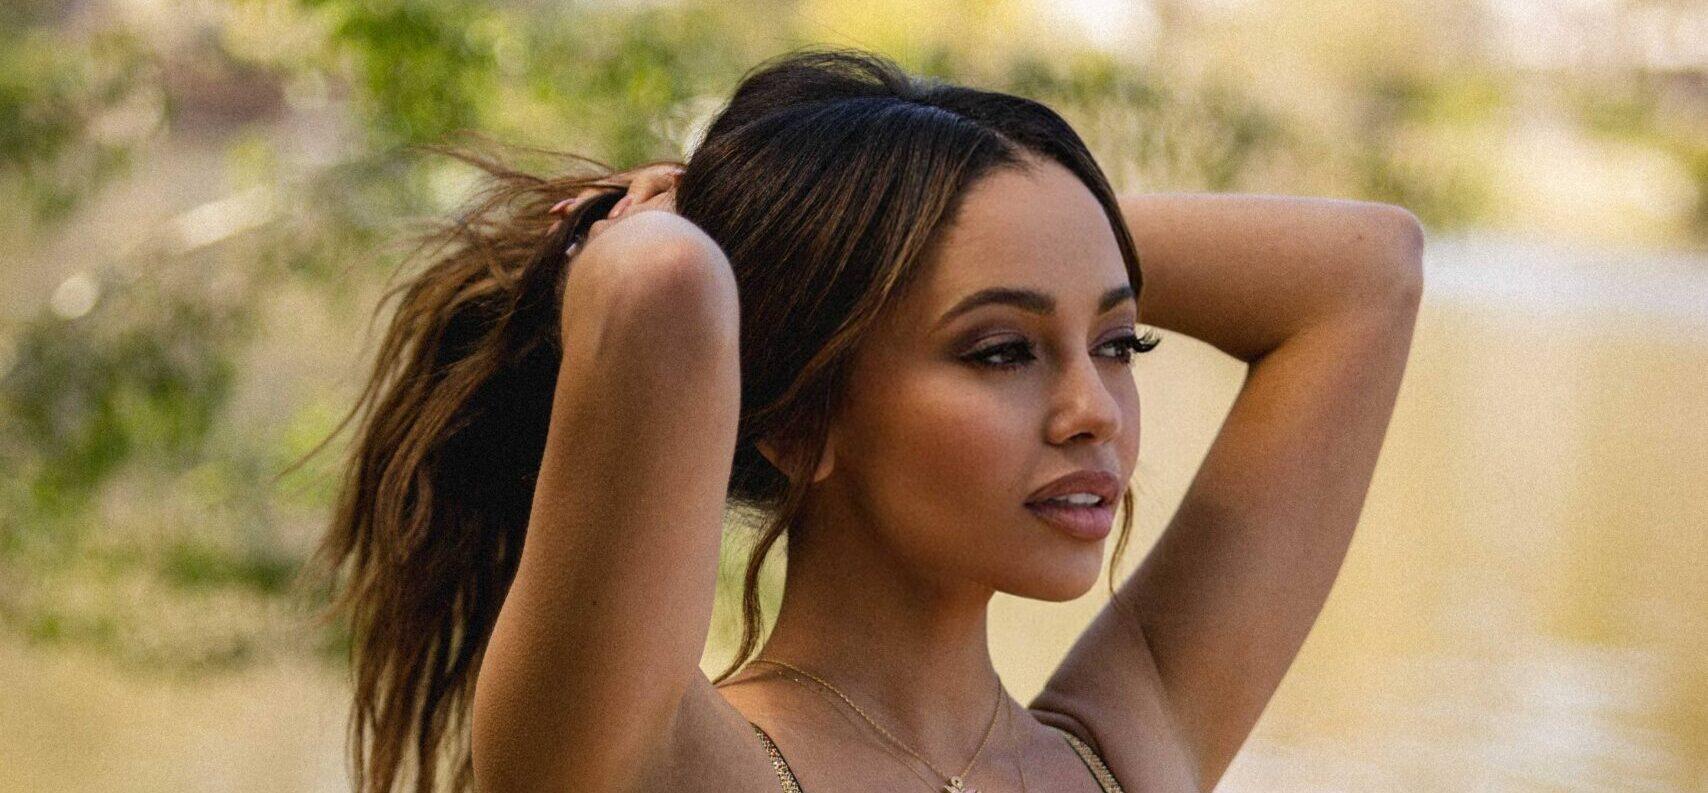 ‘Riverdale’ Star Vanessa Morgan Models Swimsuits For Giveaway